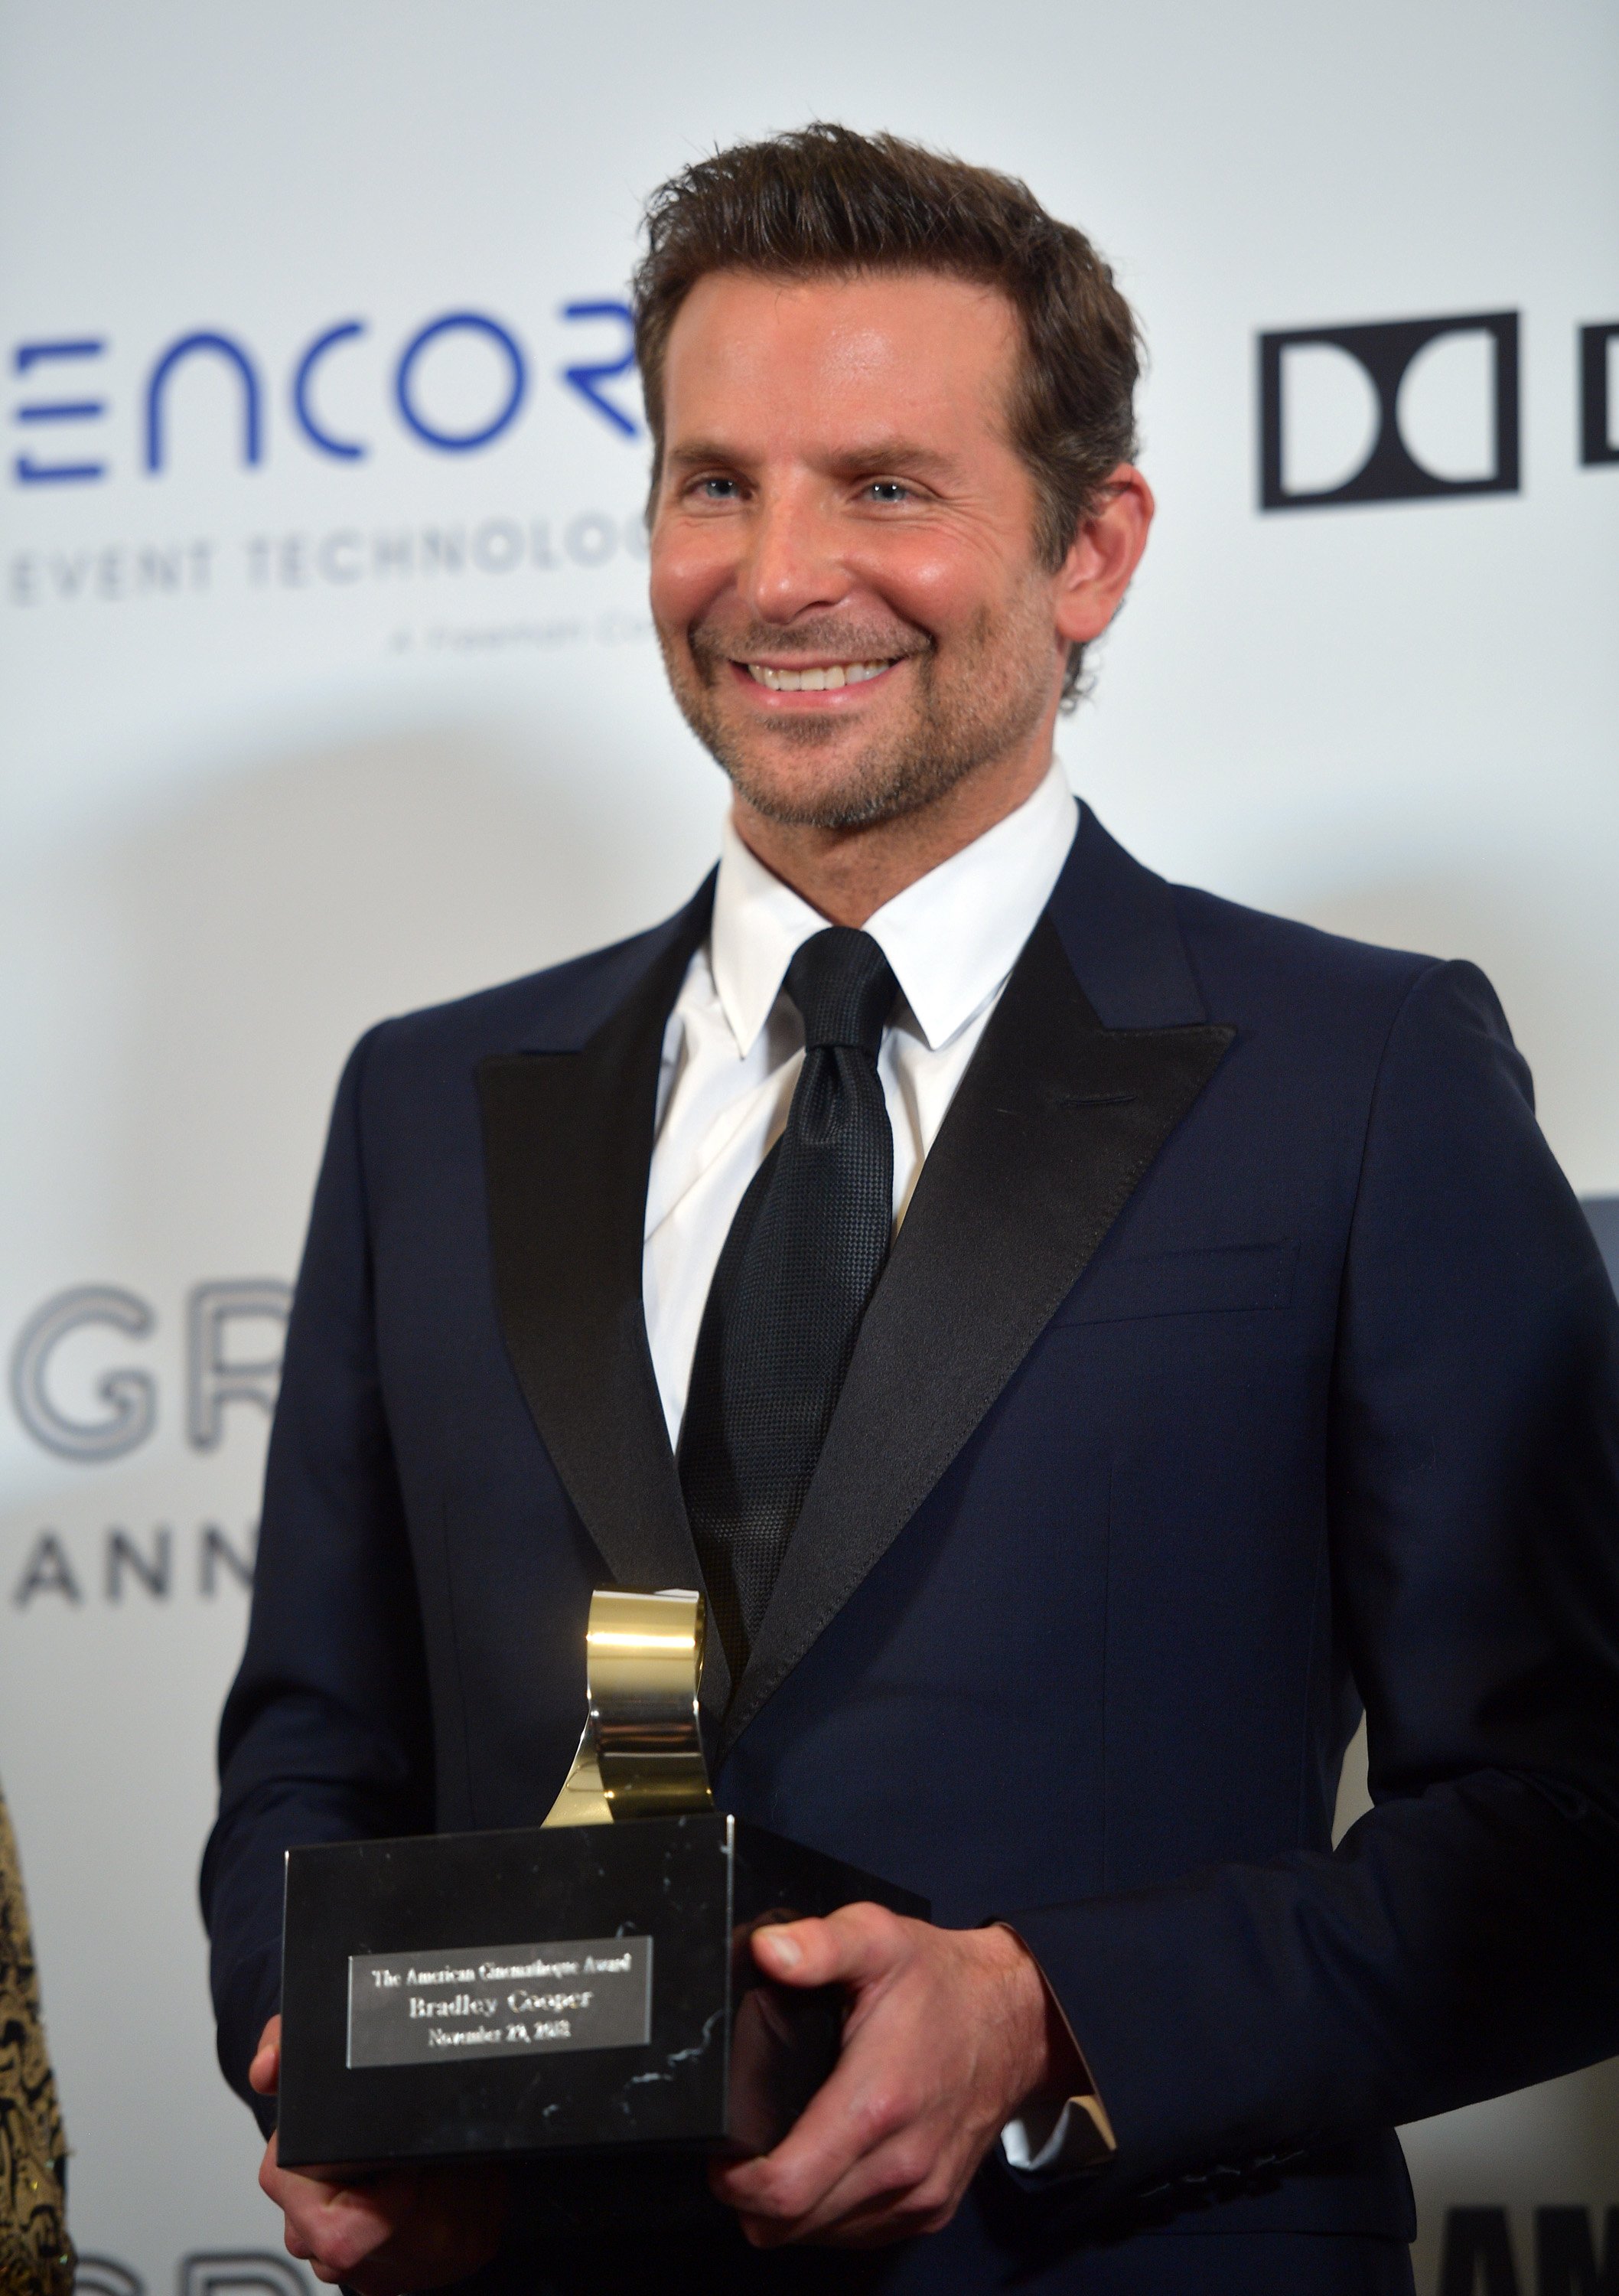 Bradley Cooper at the 32nd American Cinematheque Award Presentation Honoring Bradley Cooper on November 29, 2018 in Beverly Hills, California. | Source: Getty Images